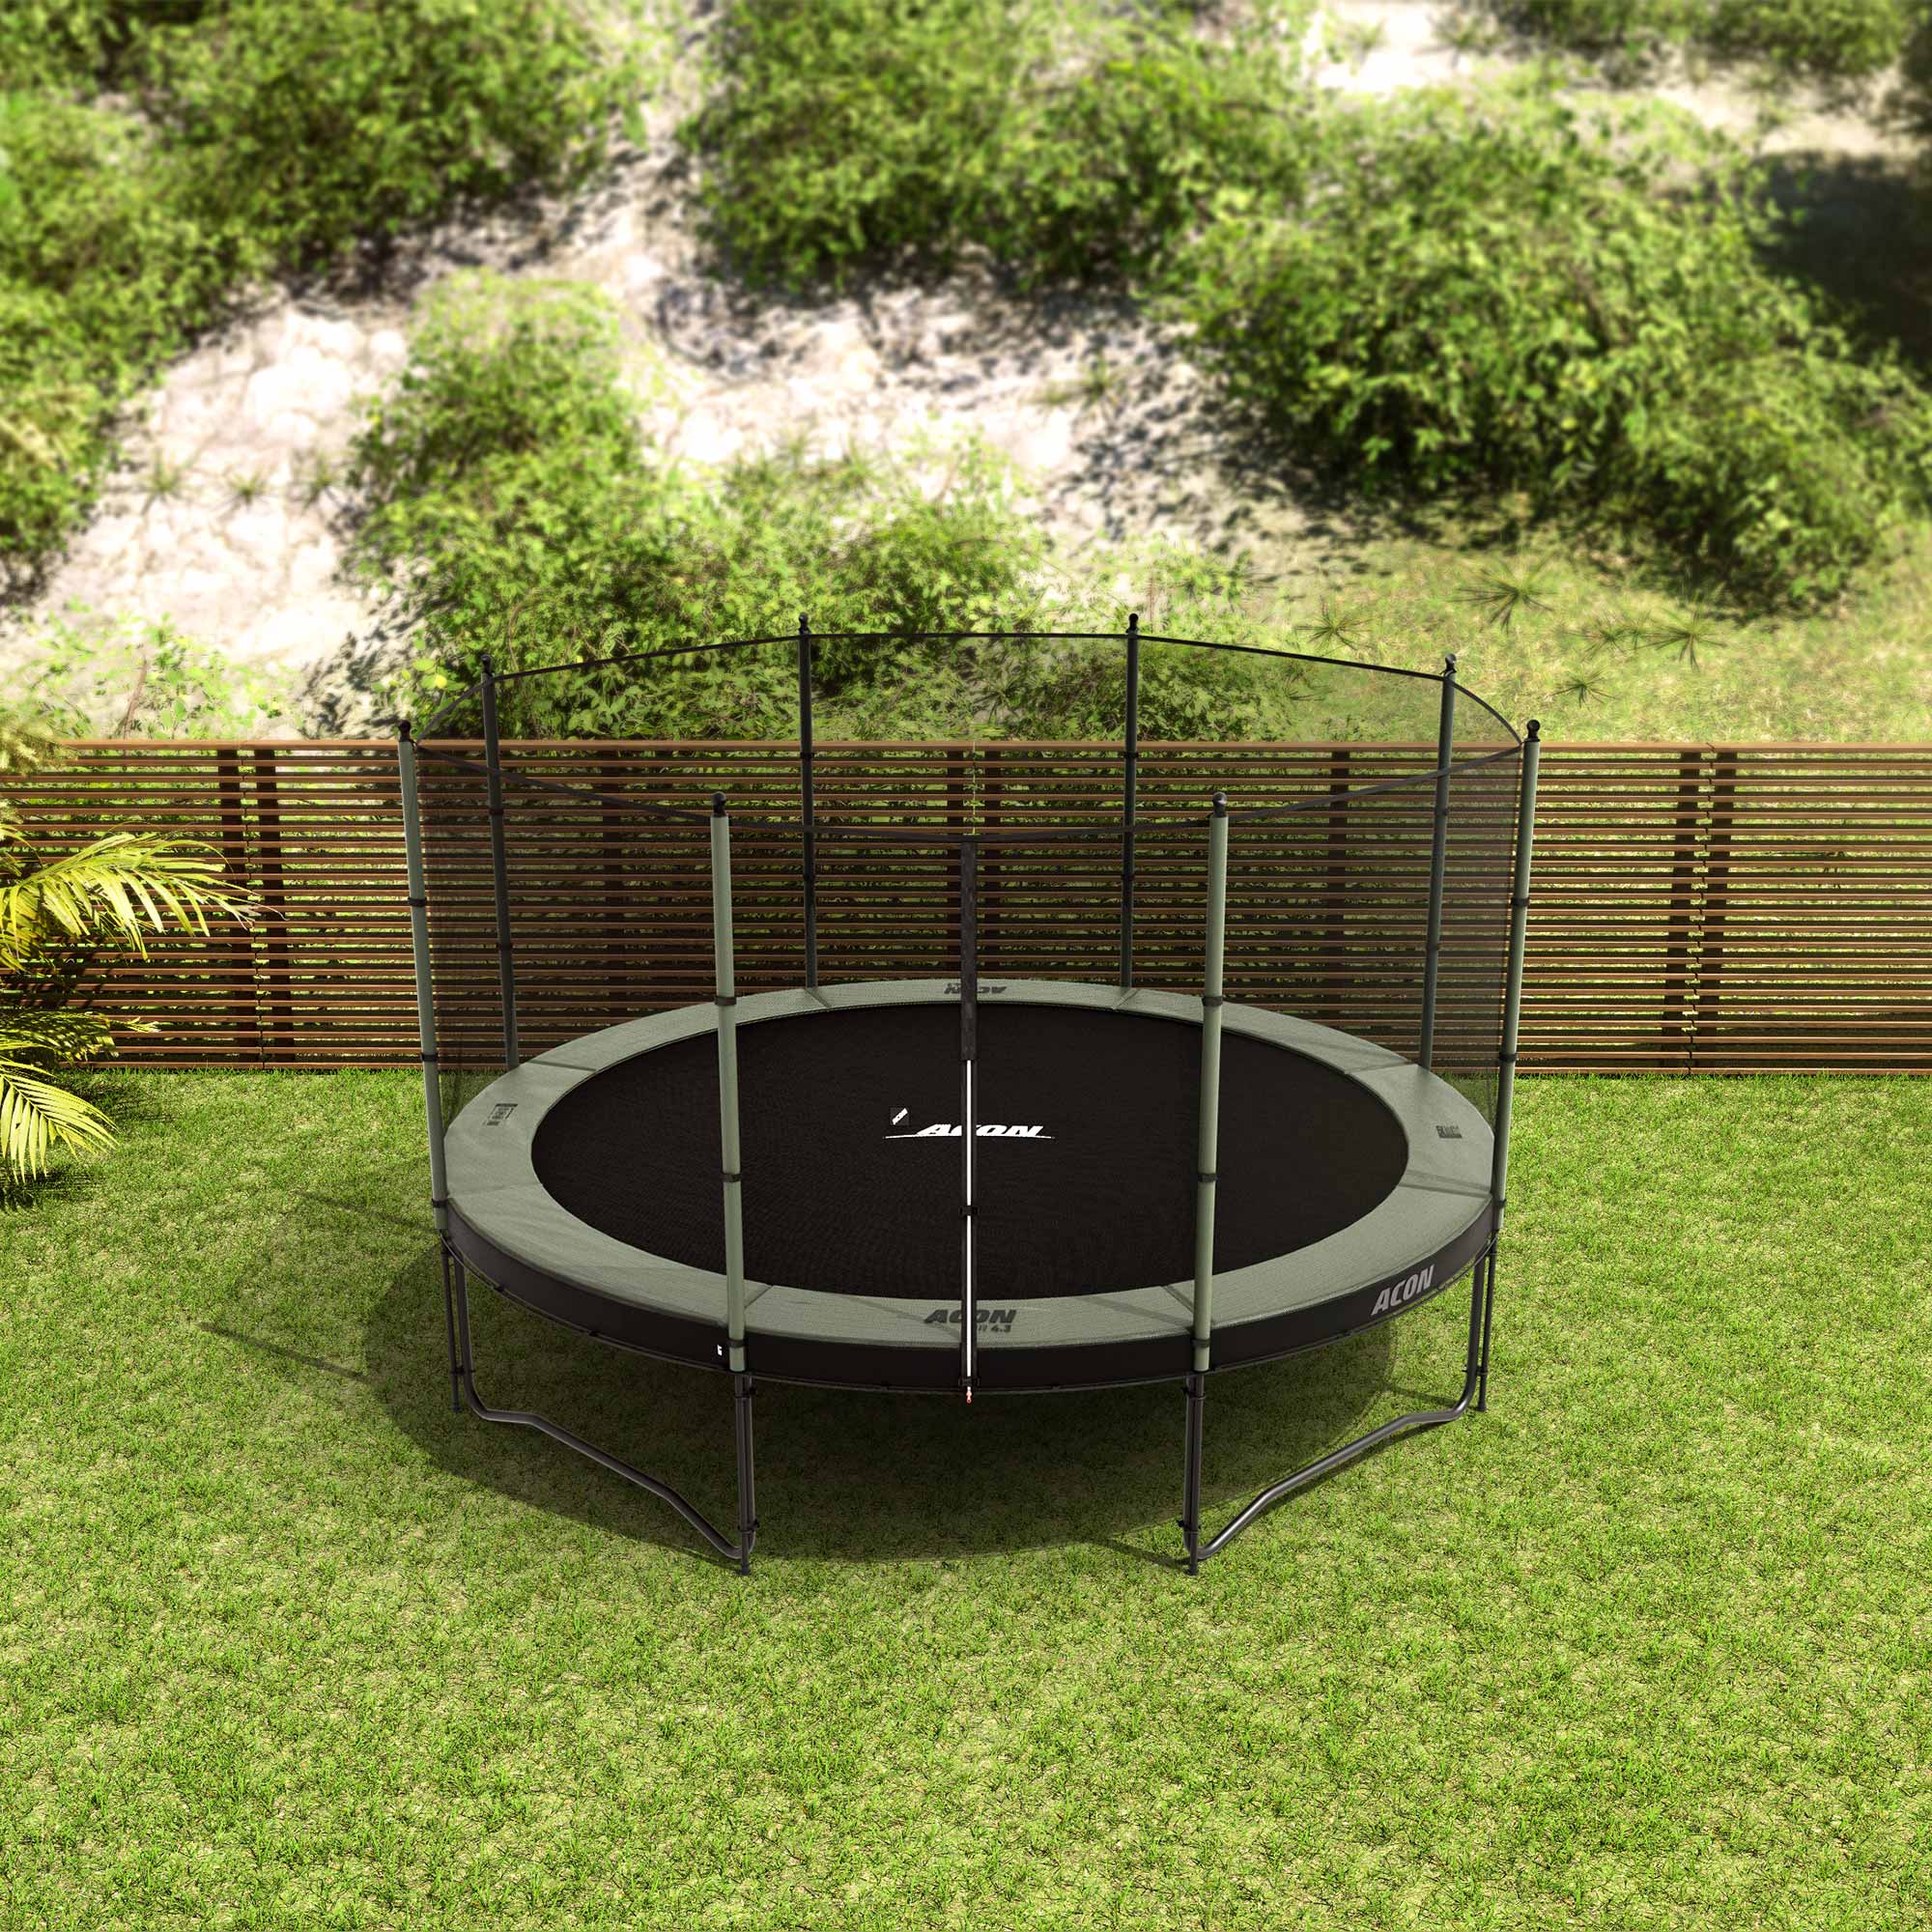 ACON Air 14ft Trampoline with Standard Enclosure in the backyard.